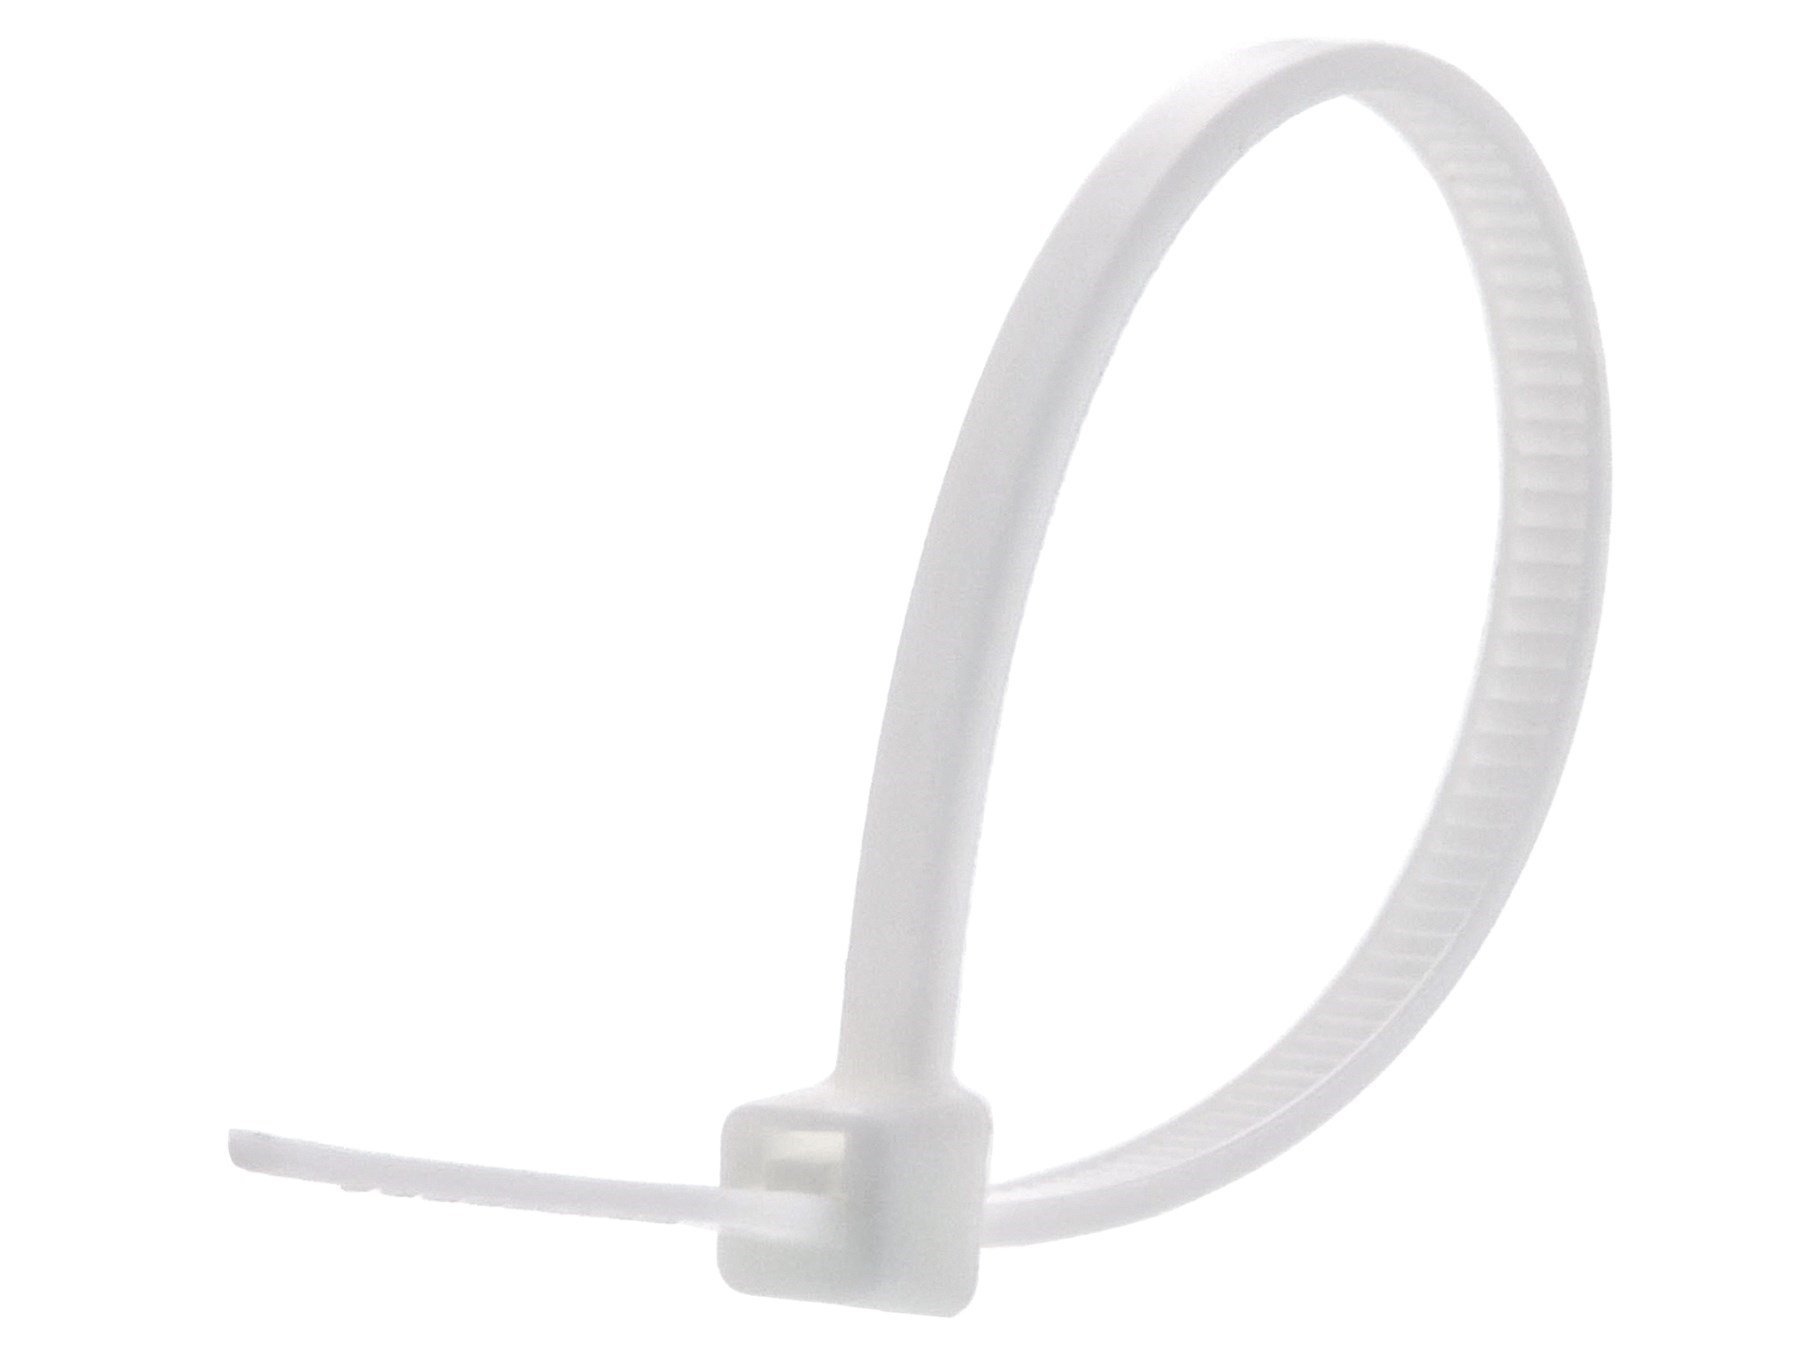 4 Inch White Mini Cable Tie - 500 Pack - Secure™ Cable Ties